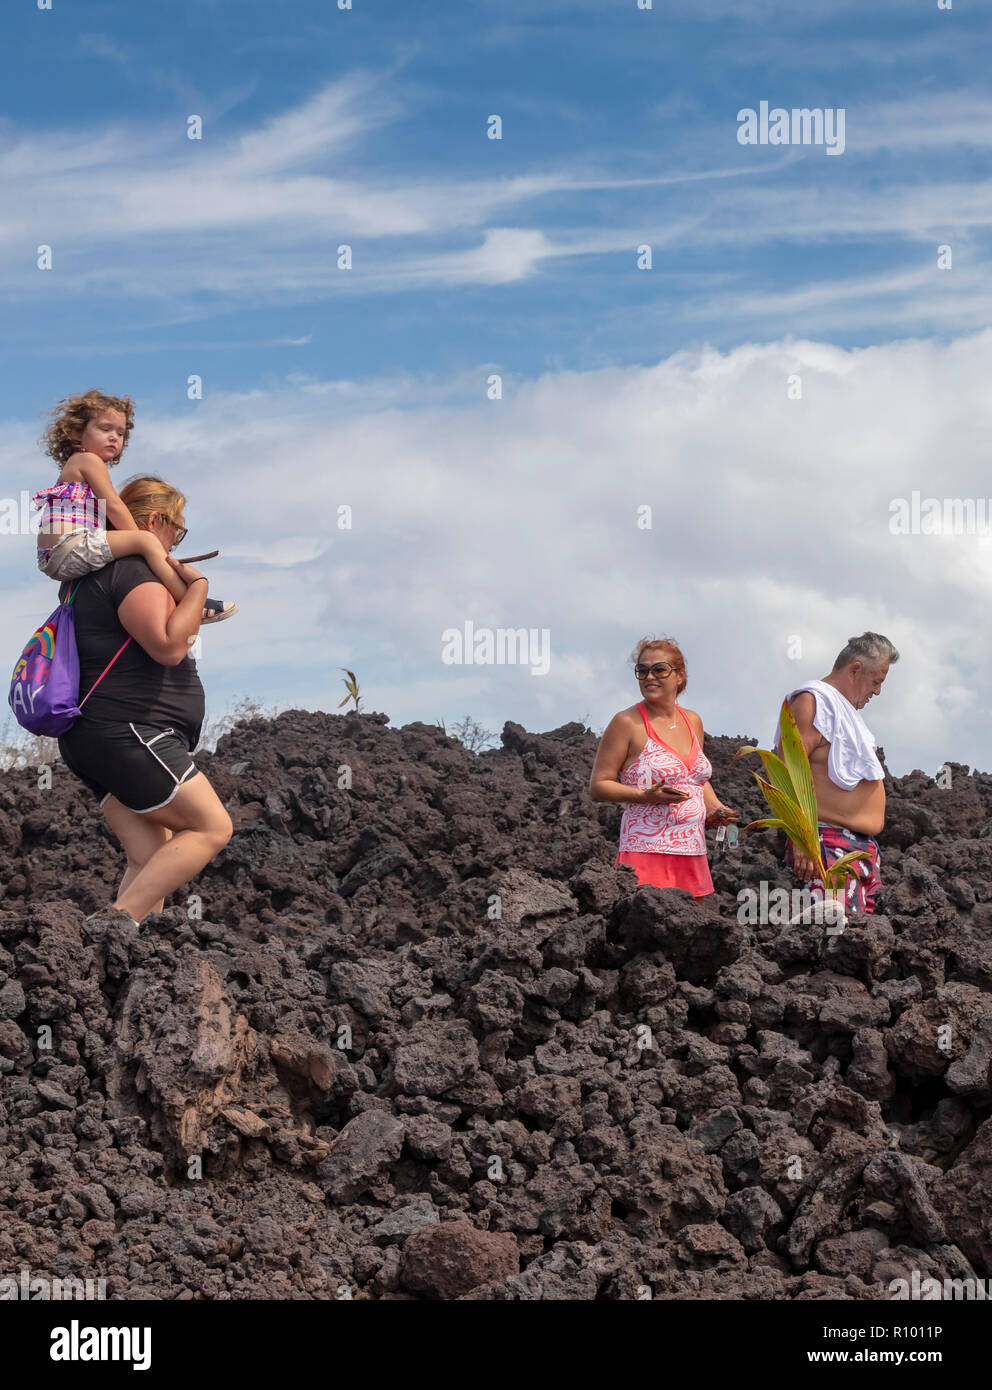 Pahoa, Hawaii - People hike across the cooled lava from the 2018 eruption of the Kilauea volcano. This lava flow destroyed over 700 homes in the Puna  Stock Photo